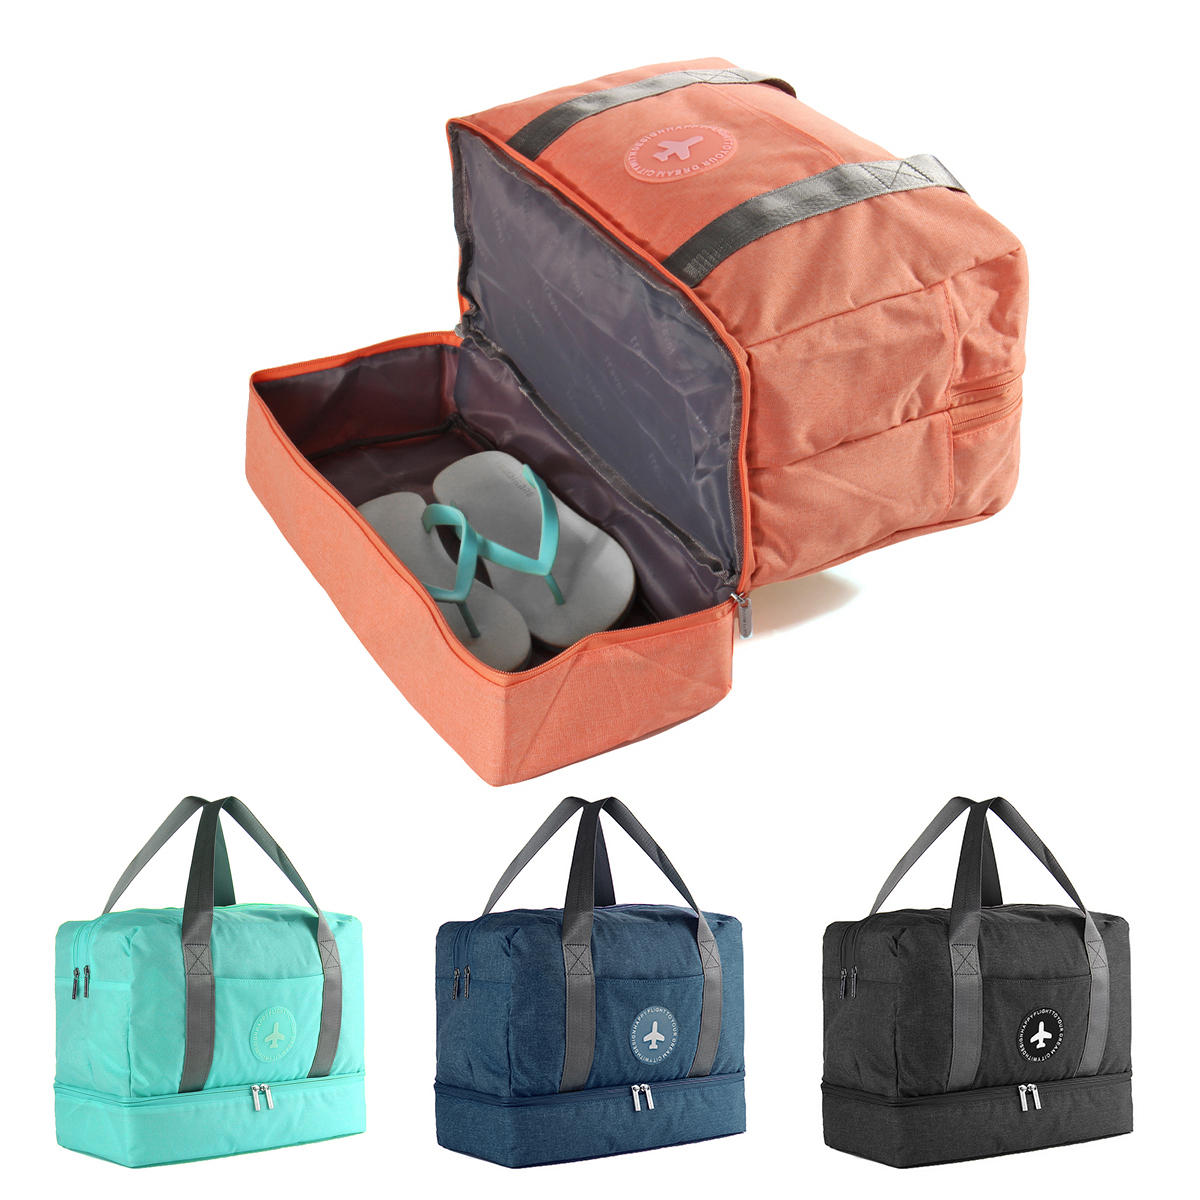 Dry and Wet Separation Bag Waterproof Clothing Storage Bags Training Yoga Handbag Shoes Isolation Sac for Travel Sport